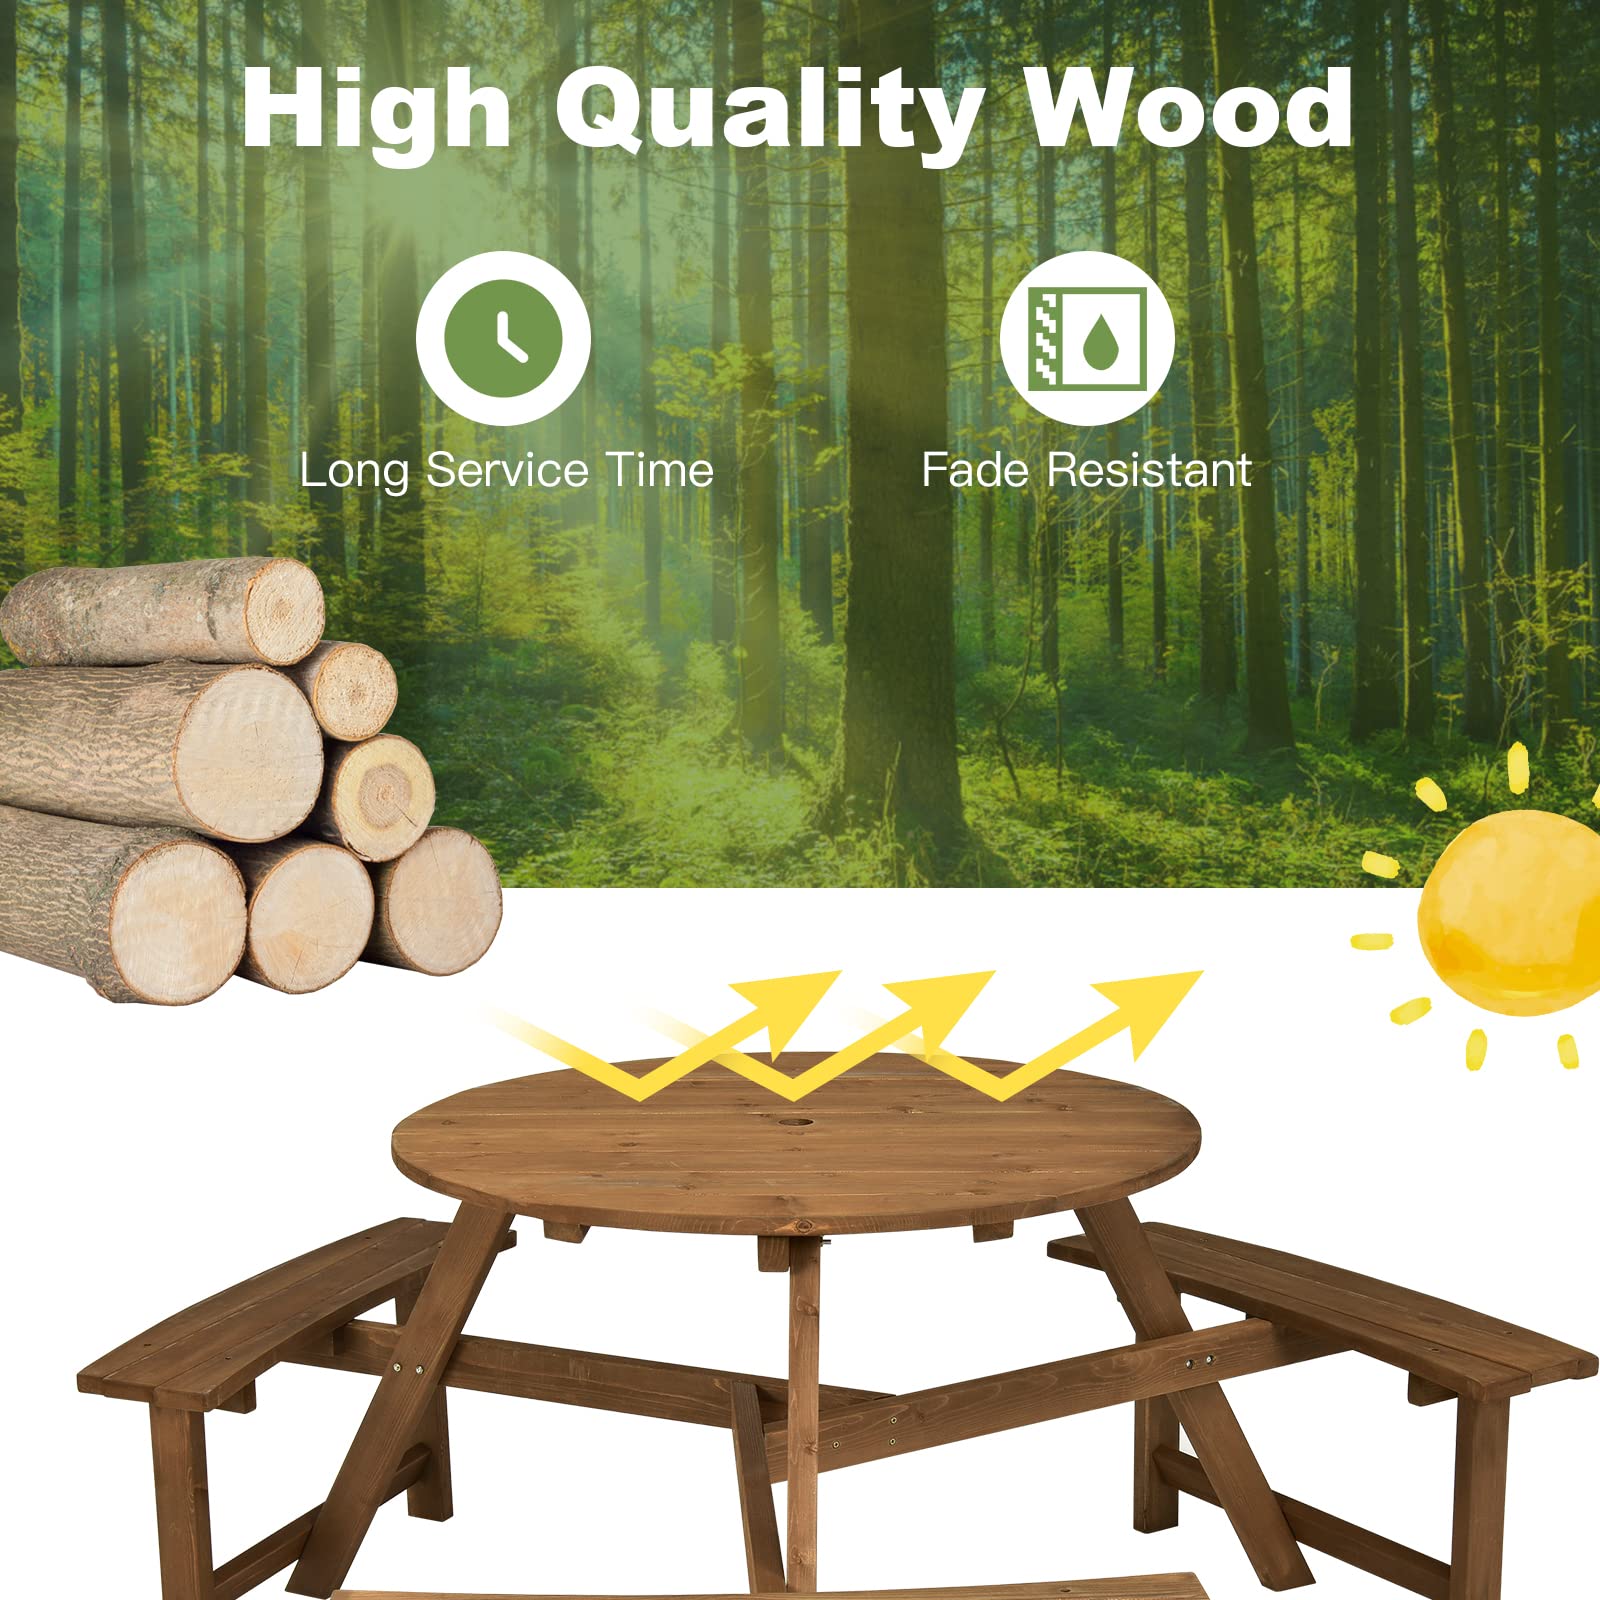 Giantex Wooden Picnic Table for 6 Person, Round Outdoor Table with 3 Benches, Umbrella Hole